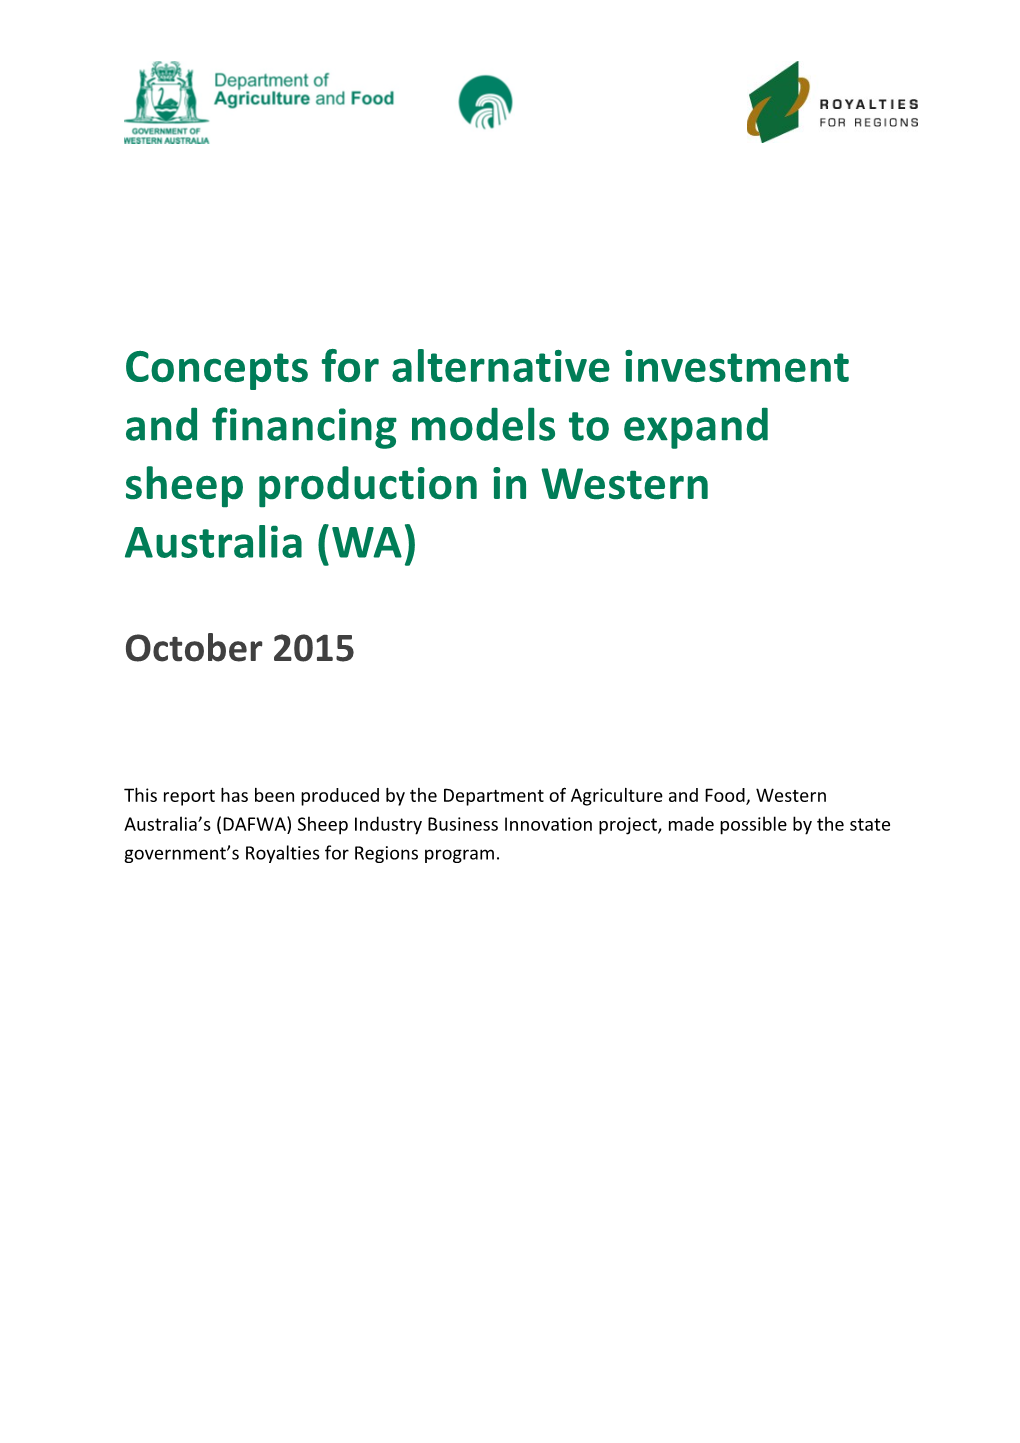 Concepts for Alternative Investment and Financing Models to Expand Sheep Production In